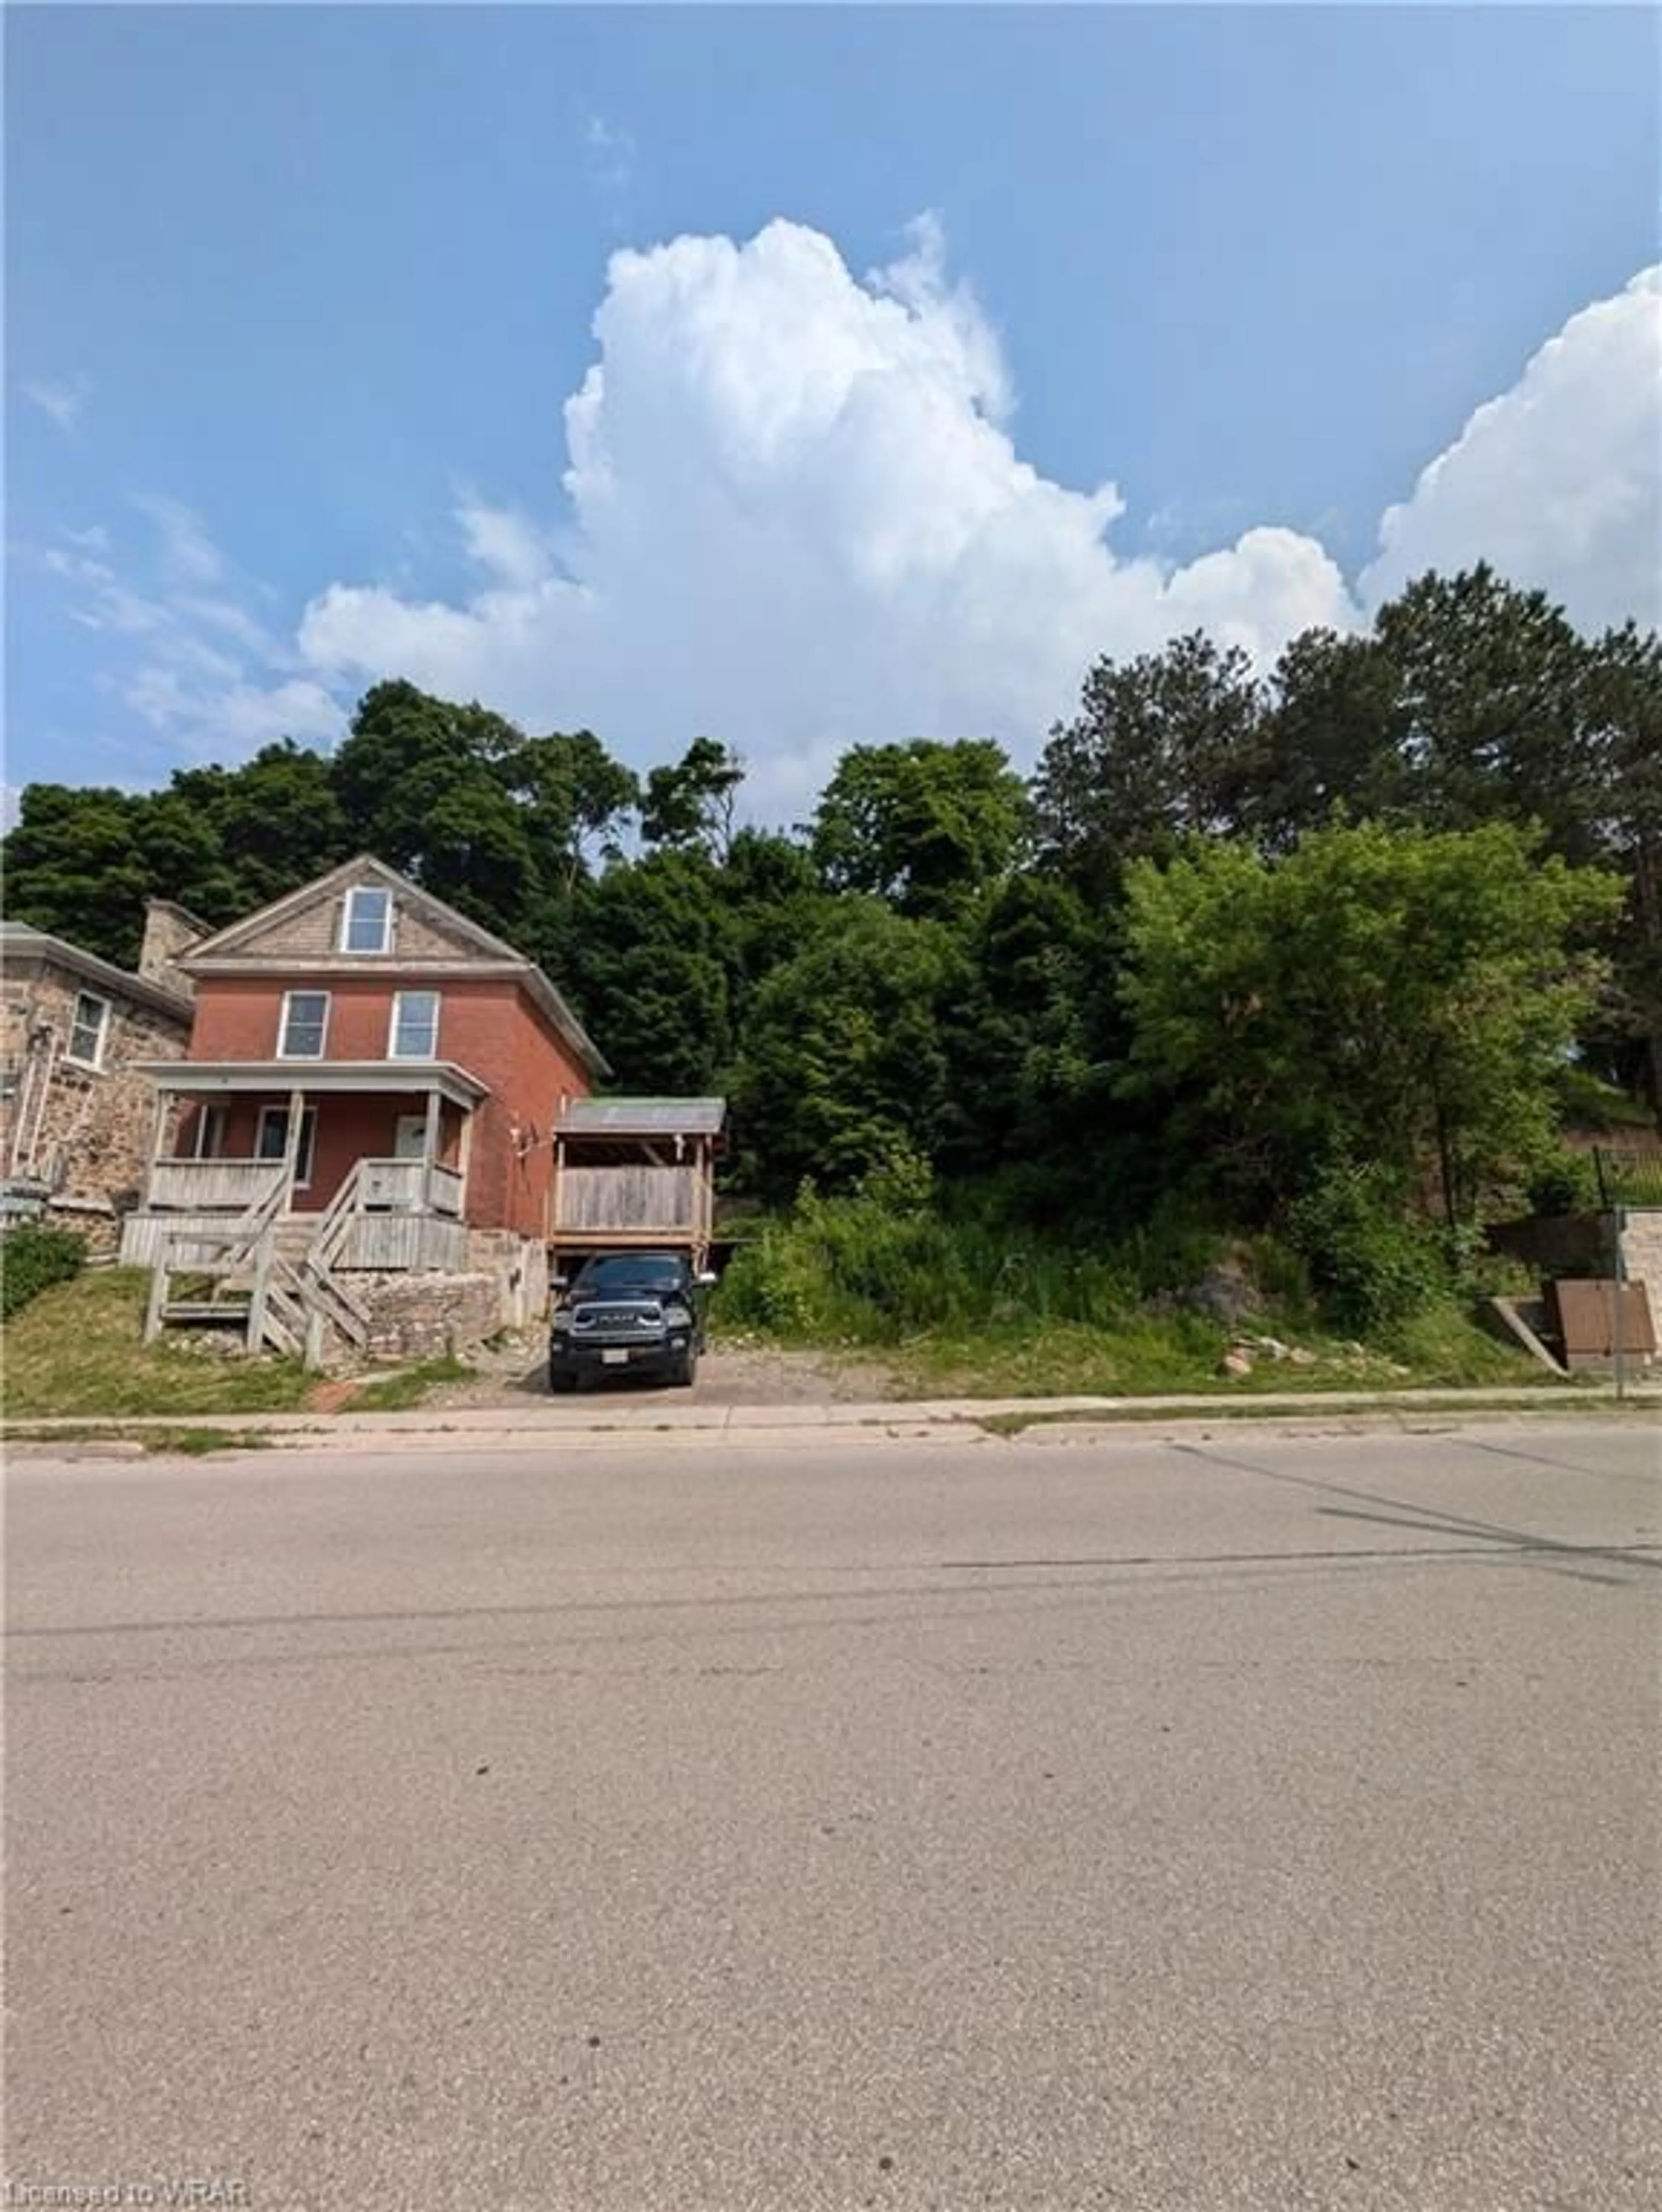 Street view for 15 Shade St, Cambridge Ontario N1R 4J6